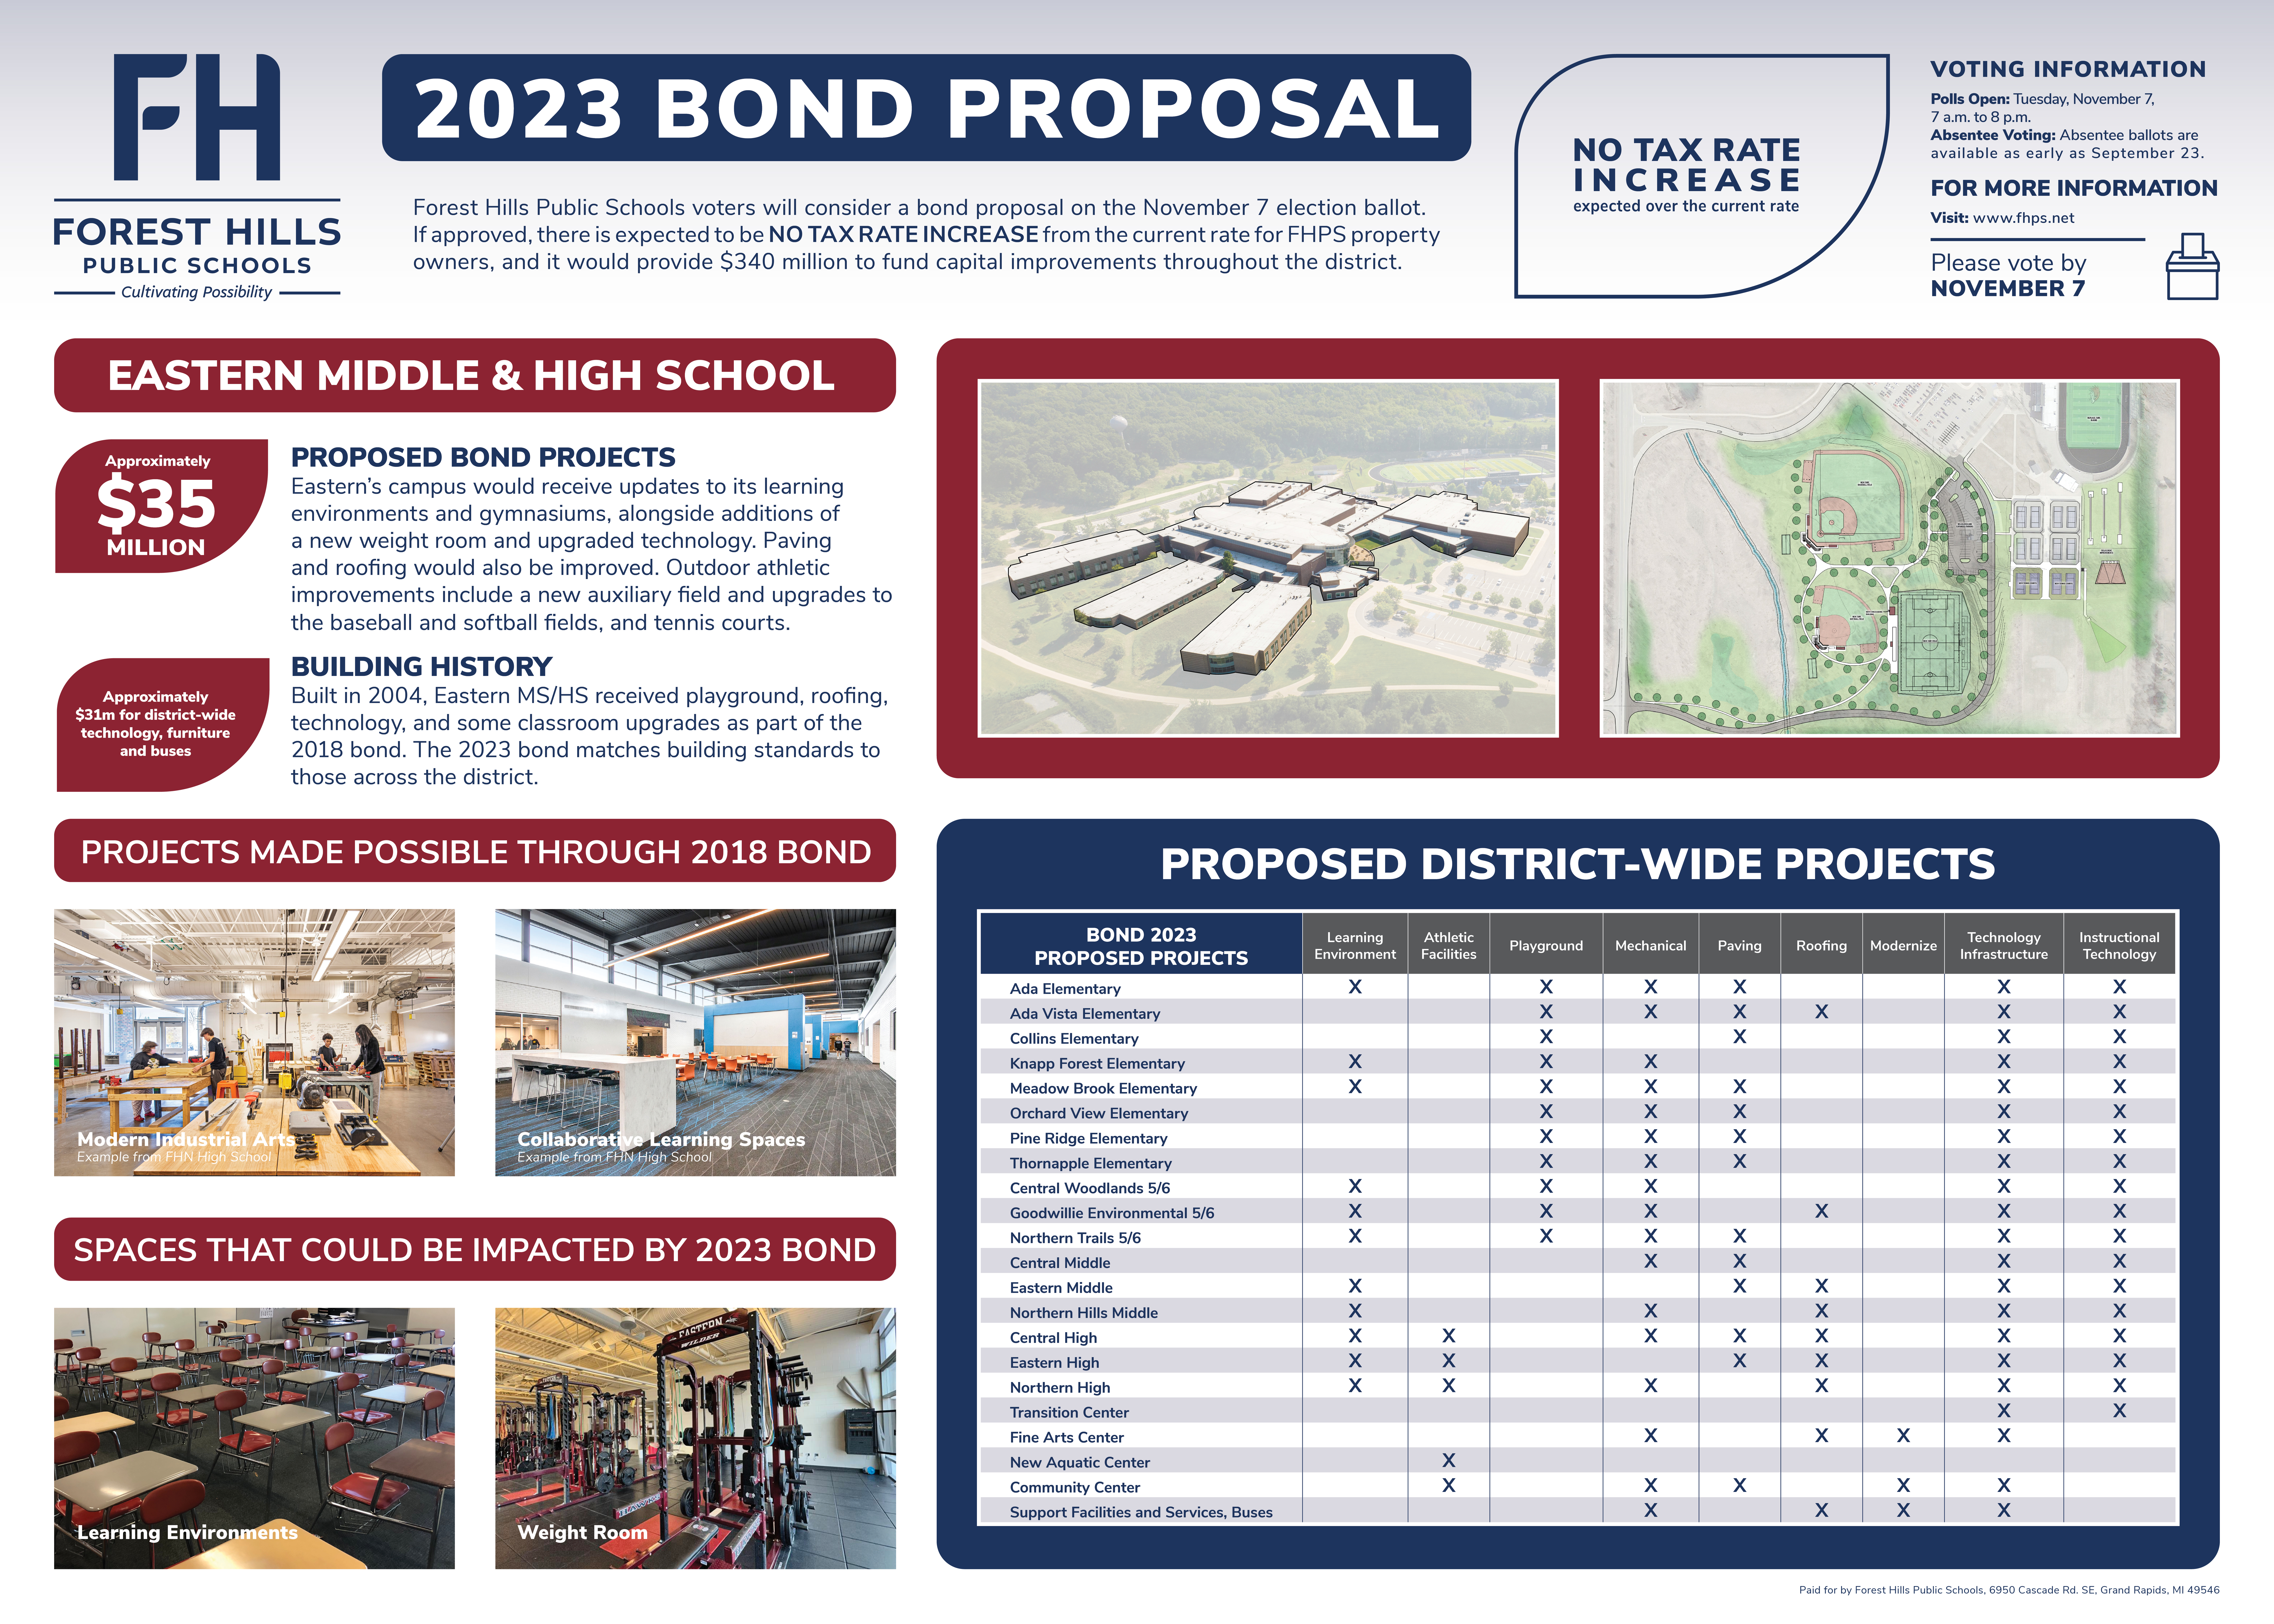 Images showing Eastern middle and high with the building drawings of new athletic fields and space that could be impacted by the 2023 bond